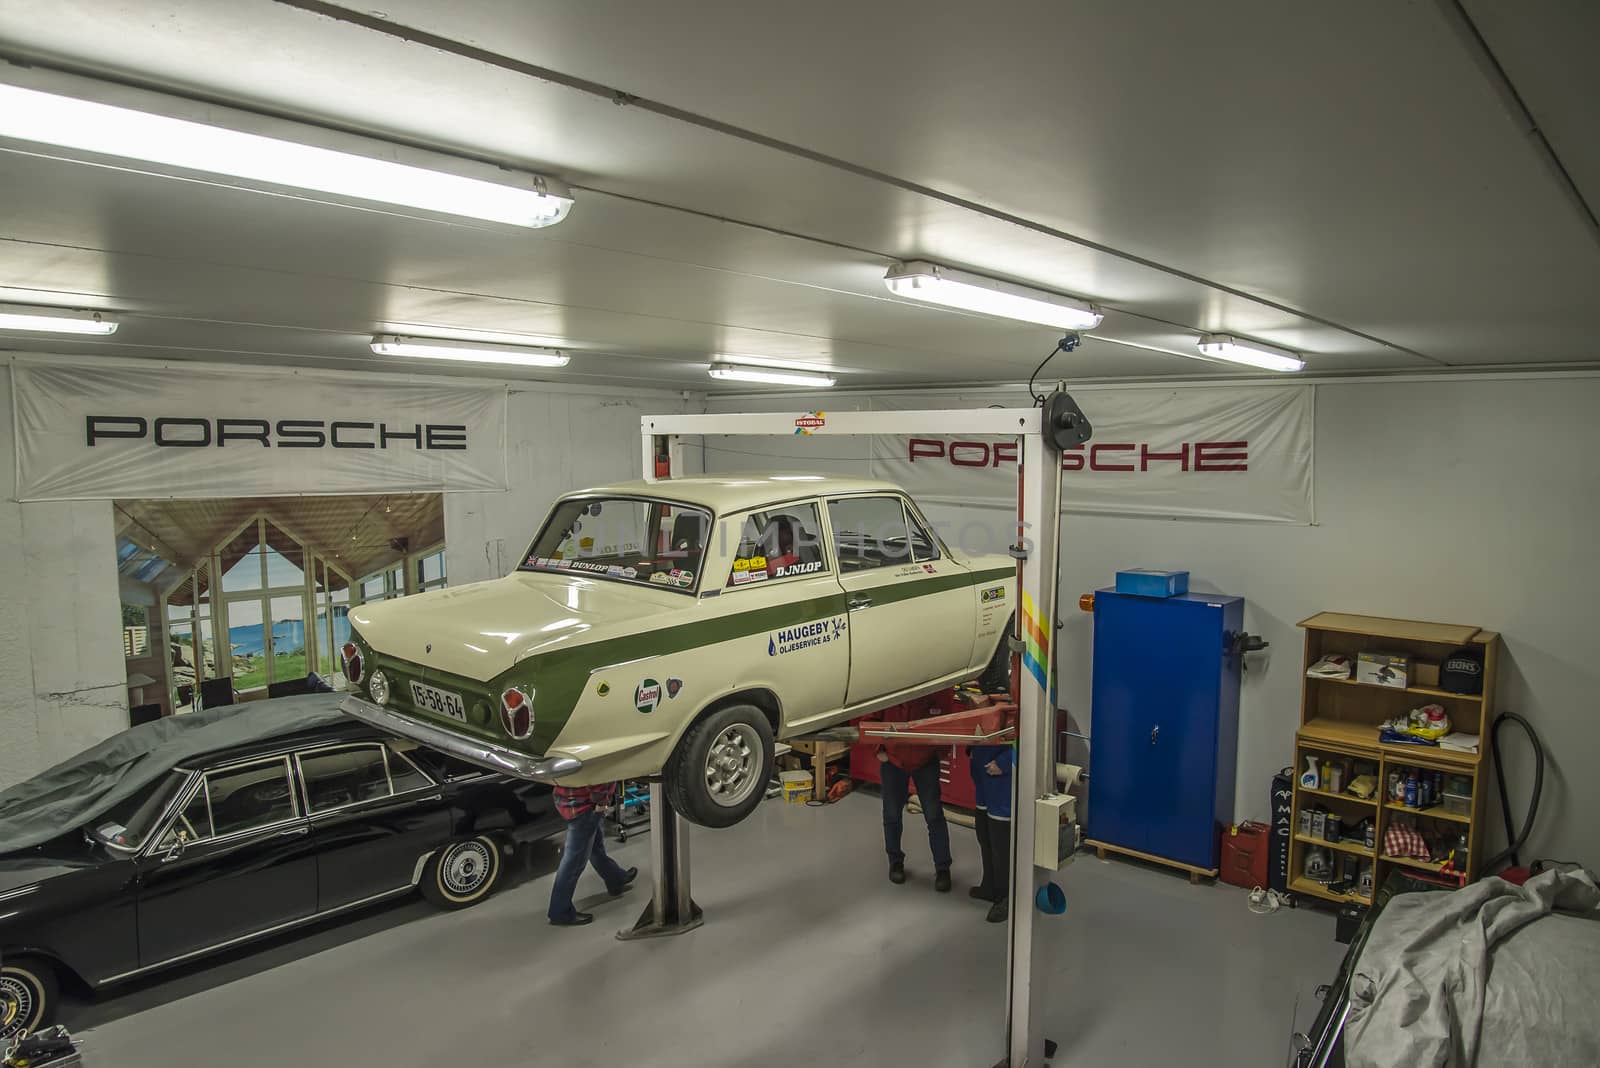 All the photos are shot in a garage in Halden, Norway where race cars and racing motorcycles are maintained and overhauled